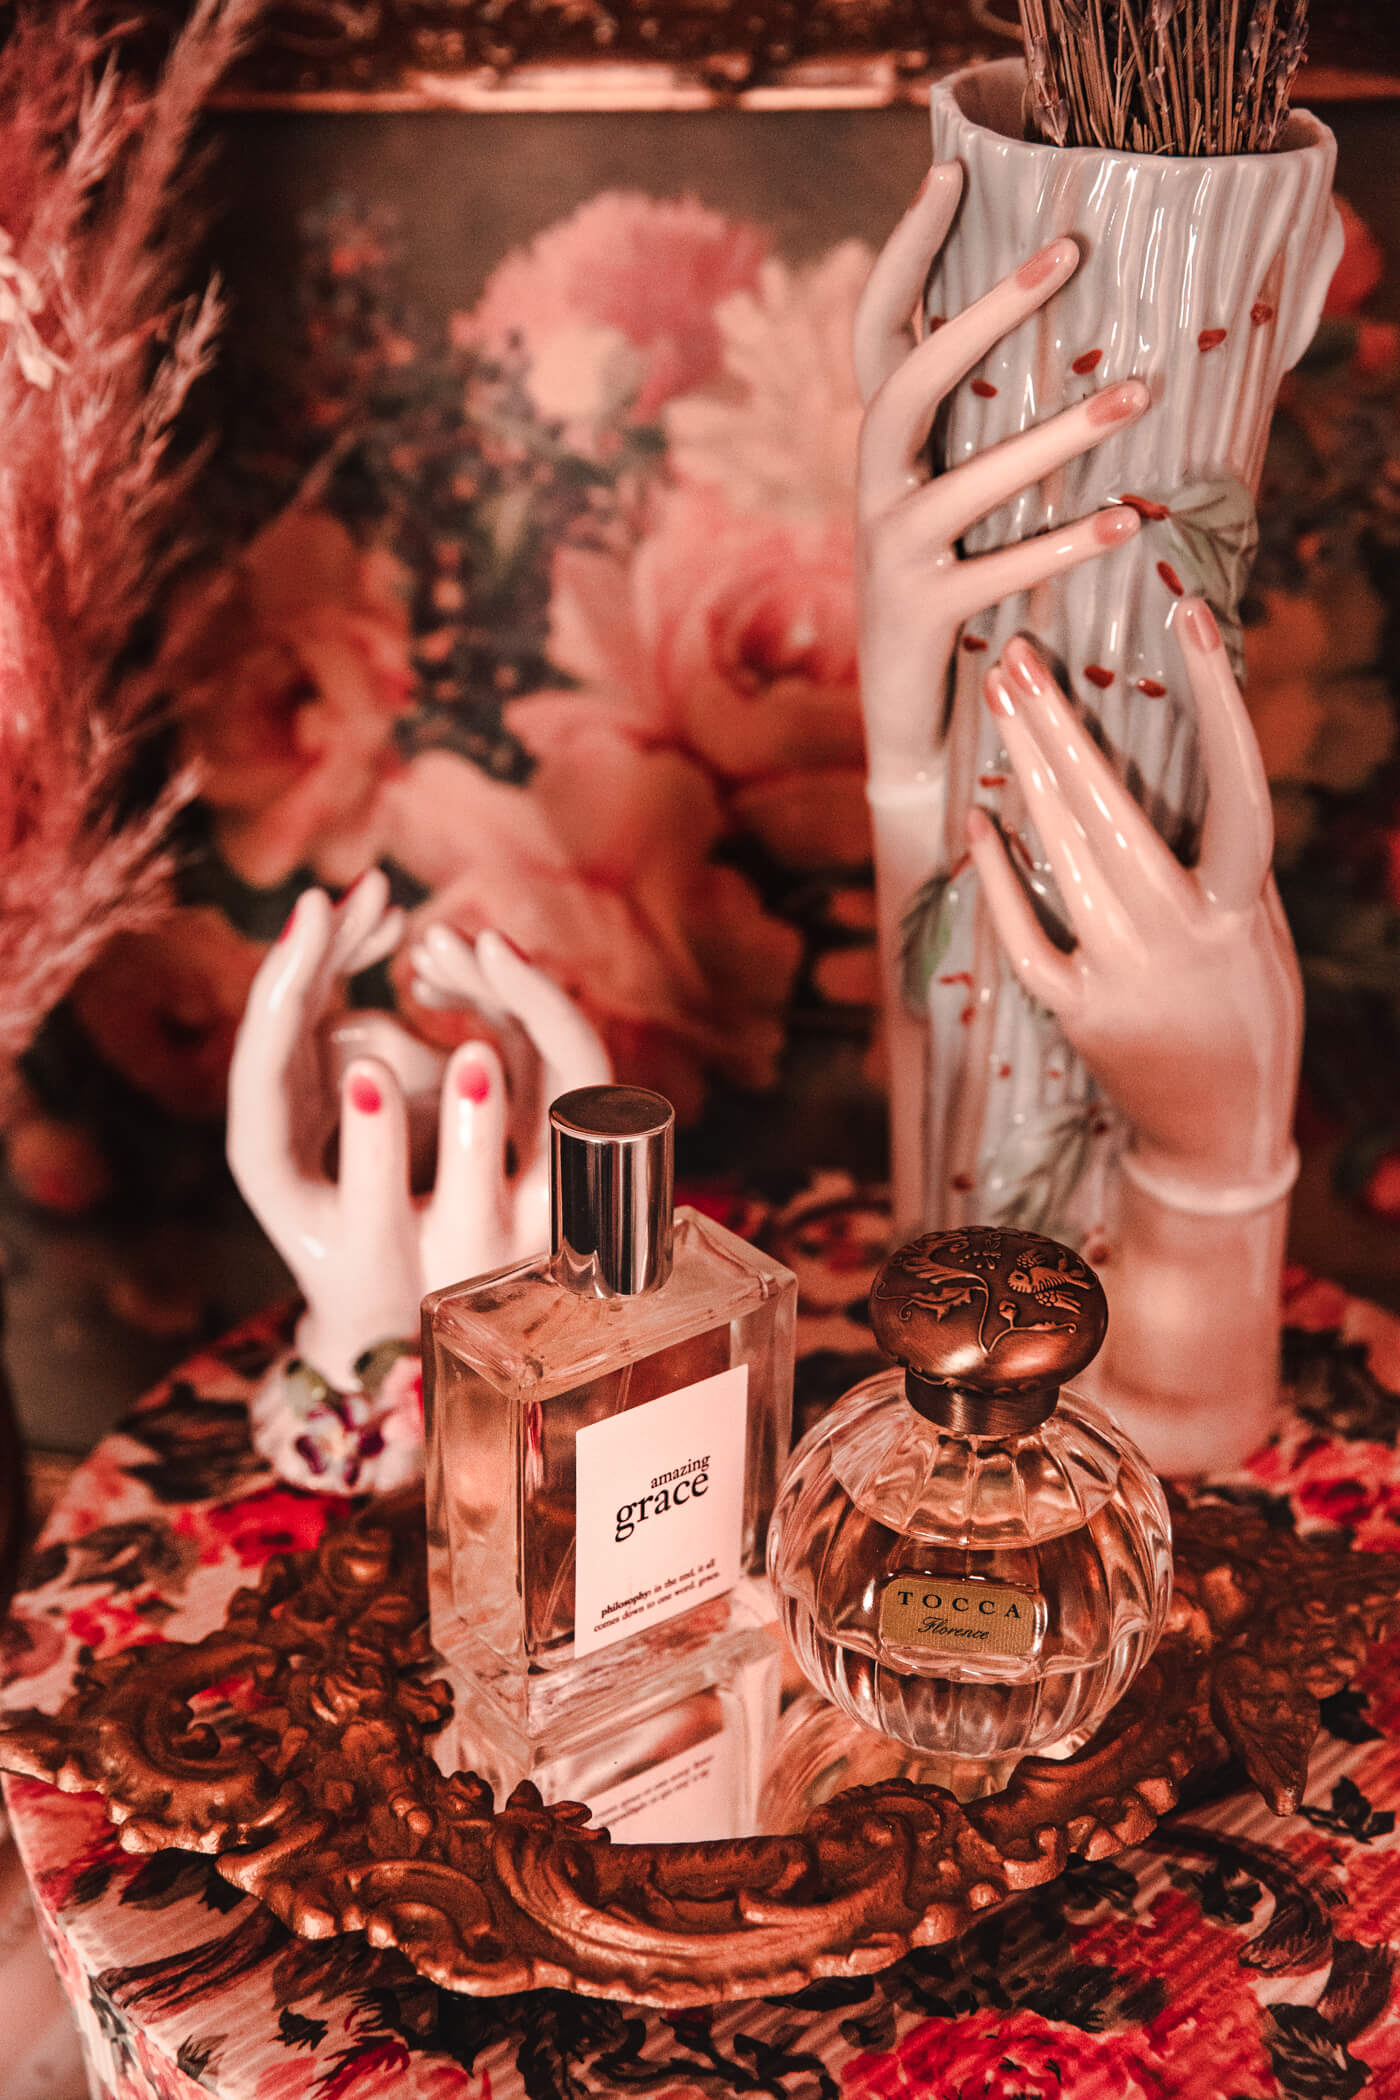 amazing grace perfume by philosophy on a table with hand figurines is one of the all time favorite perfumes of keiko